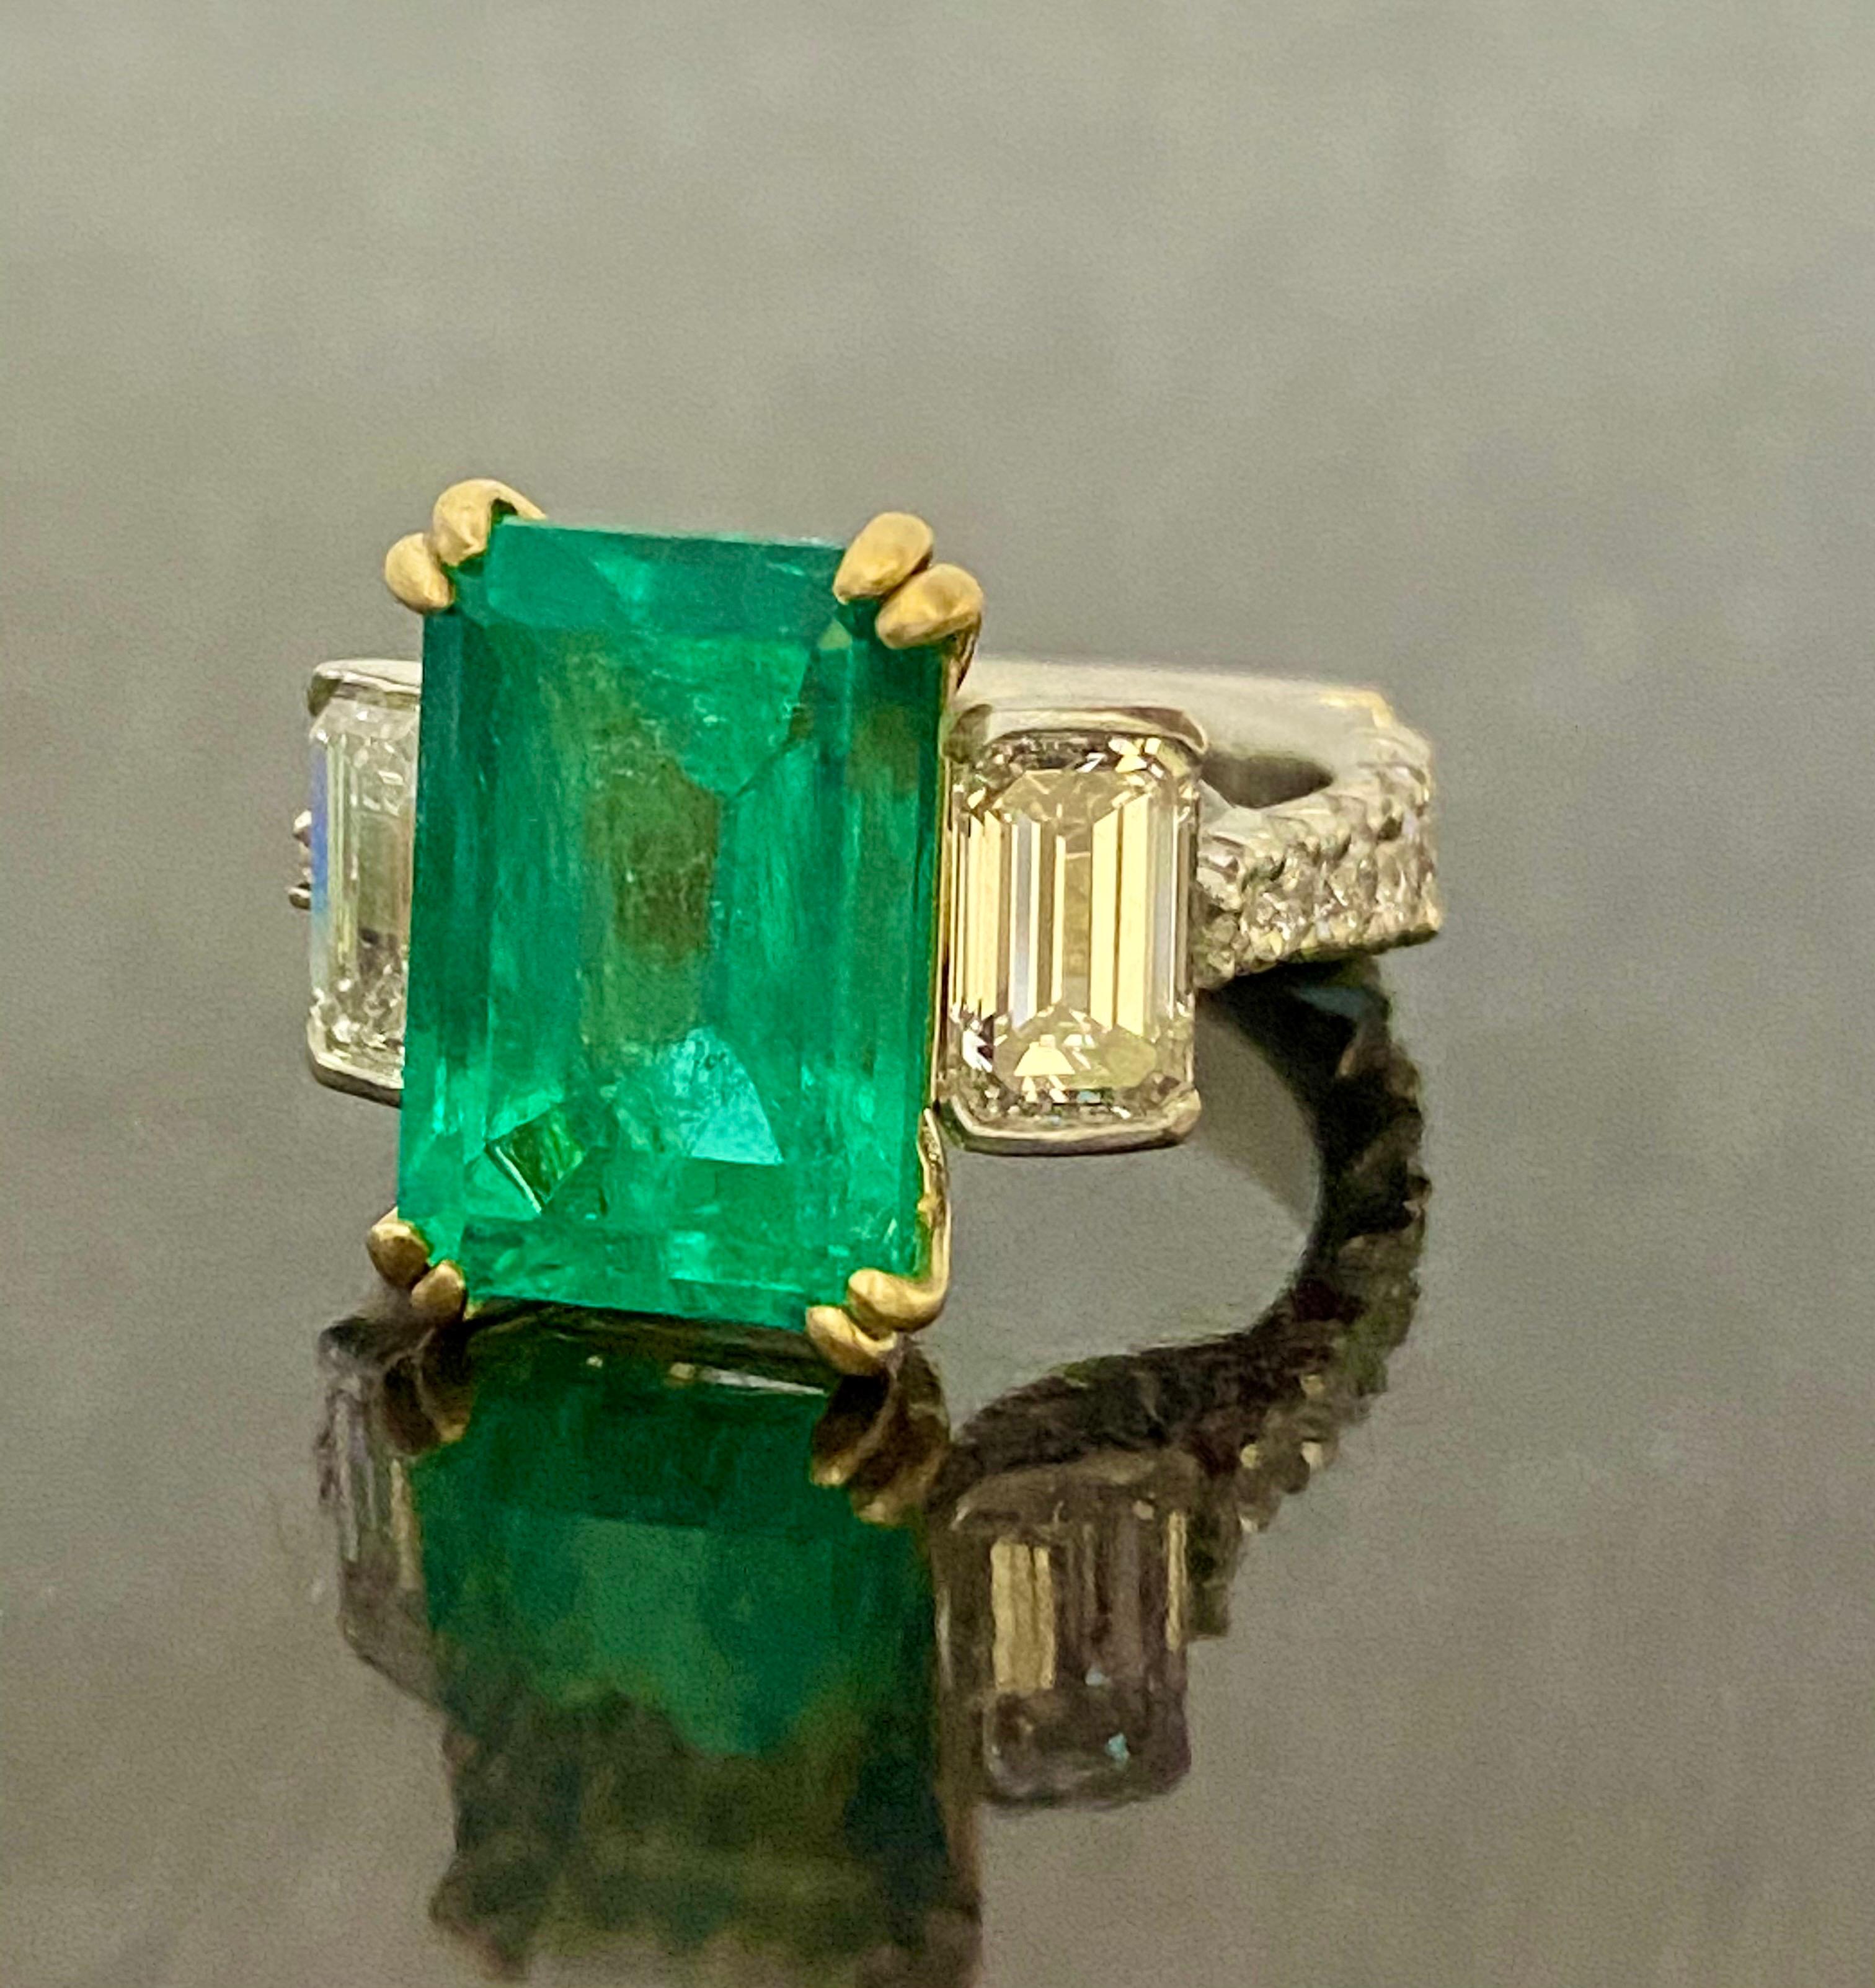 Platinum French Pave Emerald Cut Diamond 6.78 Carat GIA Colombian Emerald Ring For Sale 5